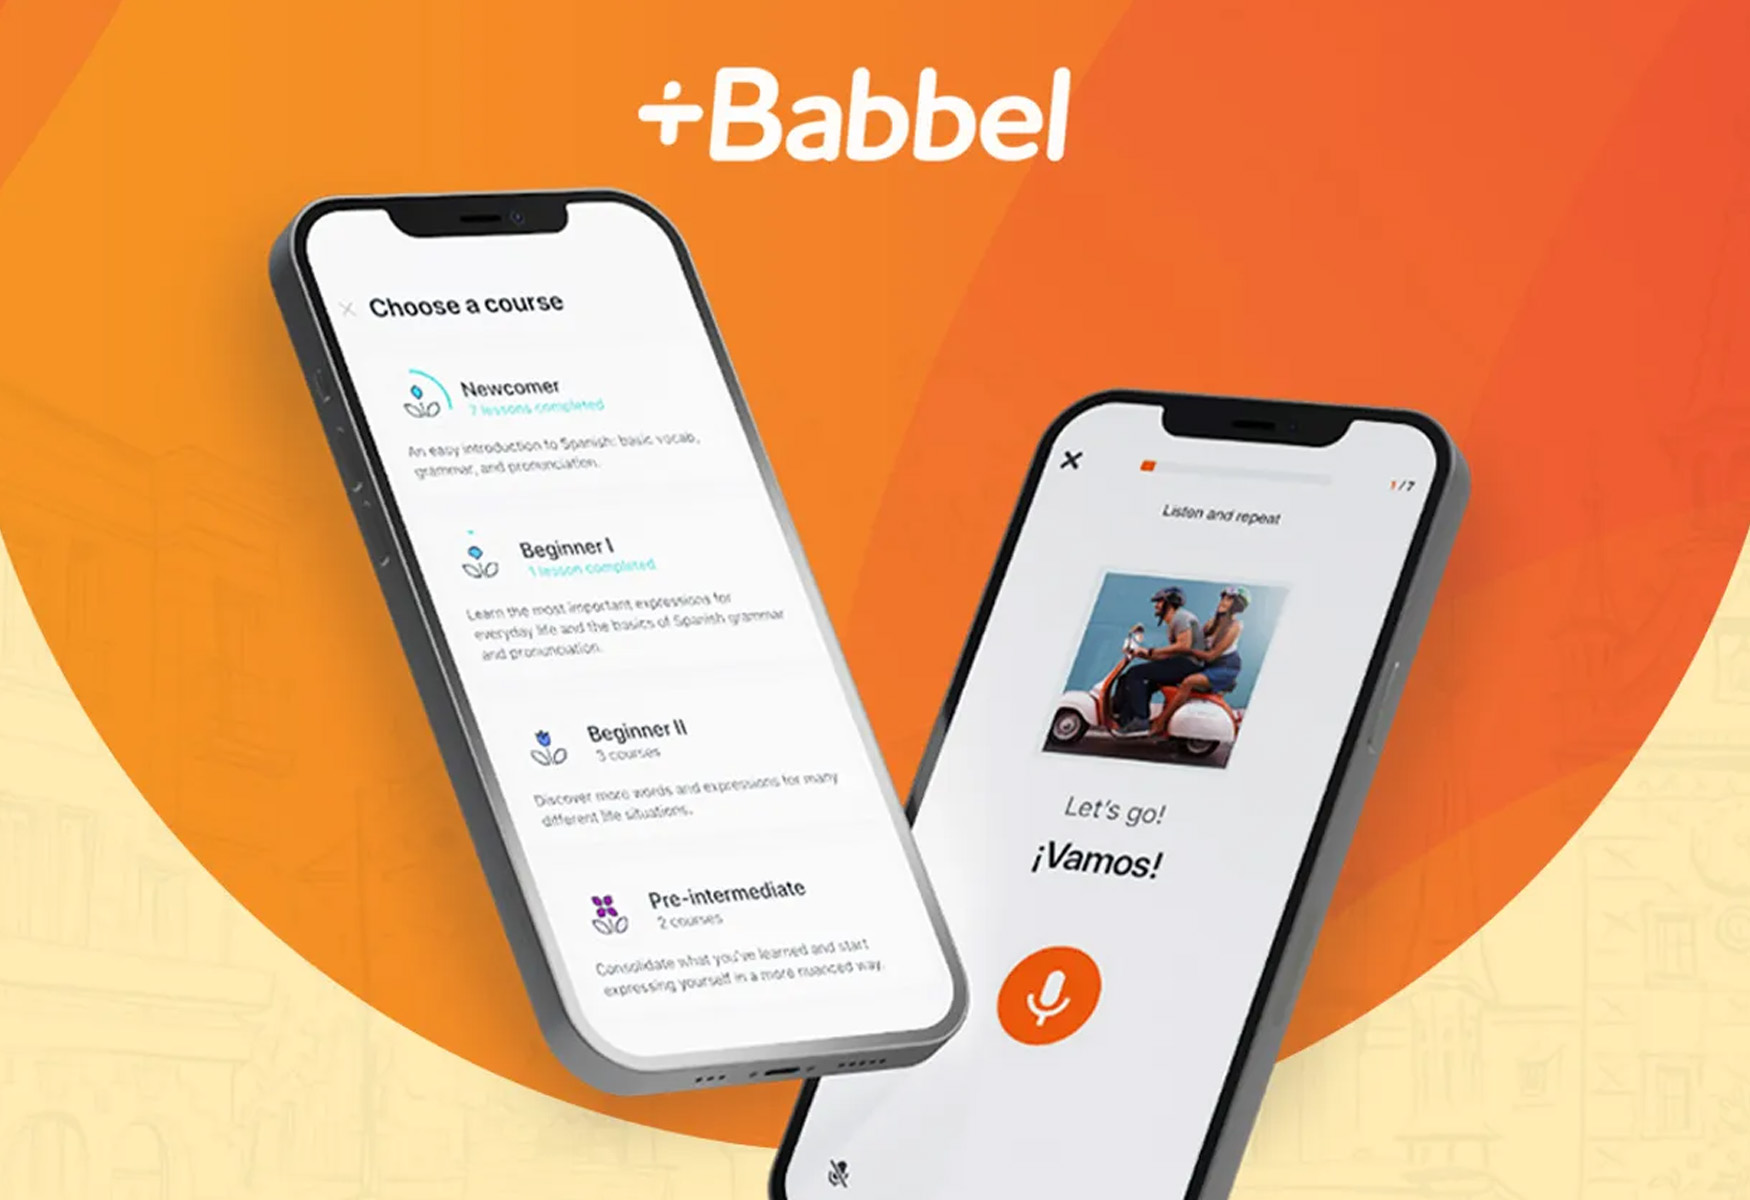 give-the-gift-of-language-learning-with-babbel-now-449-off-during-the-merry-elfin-christmas-campaign